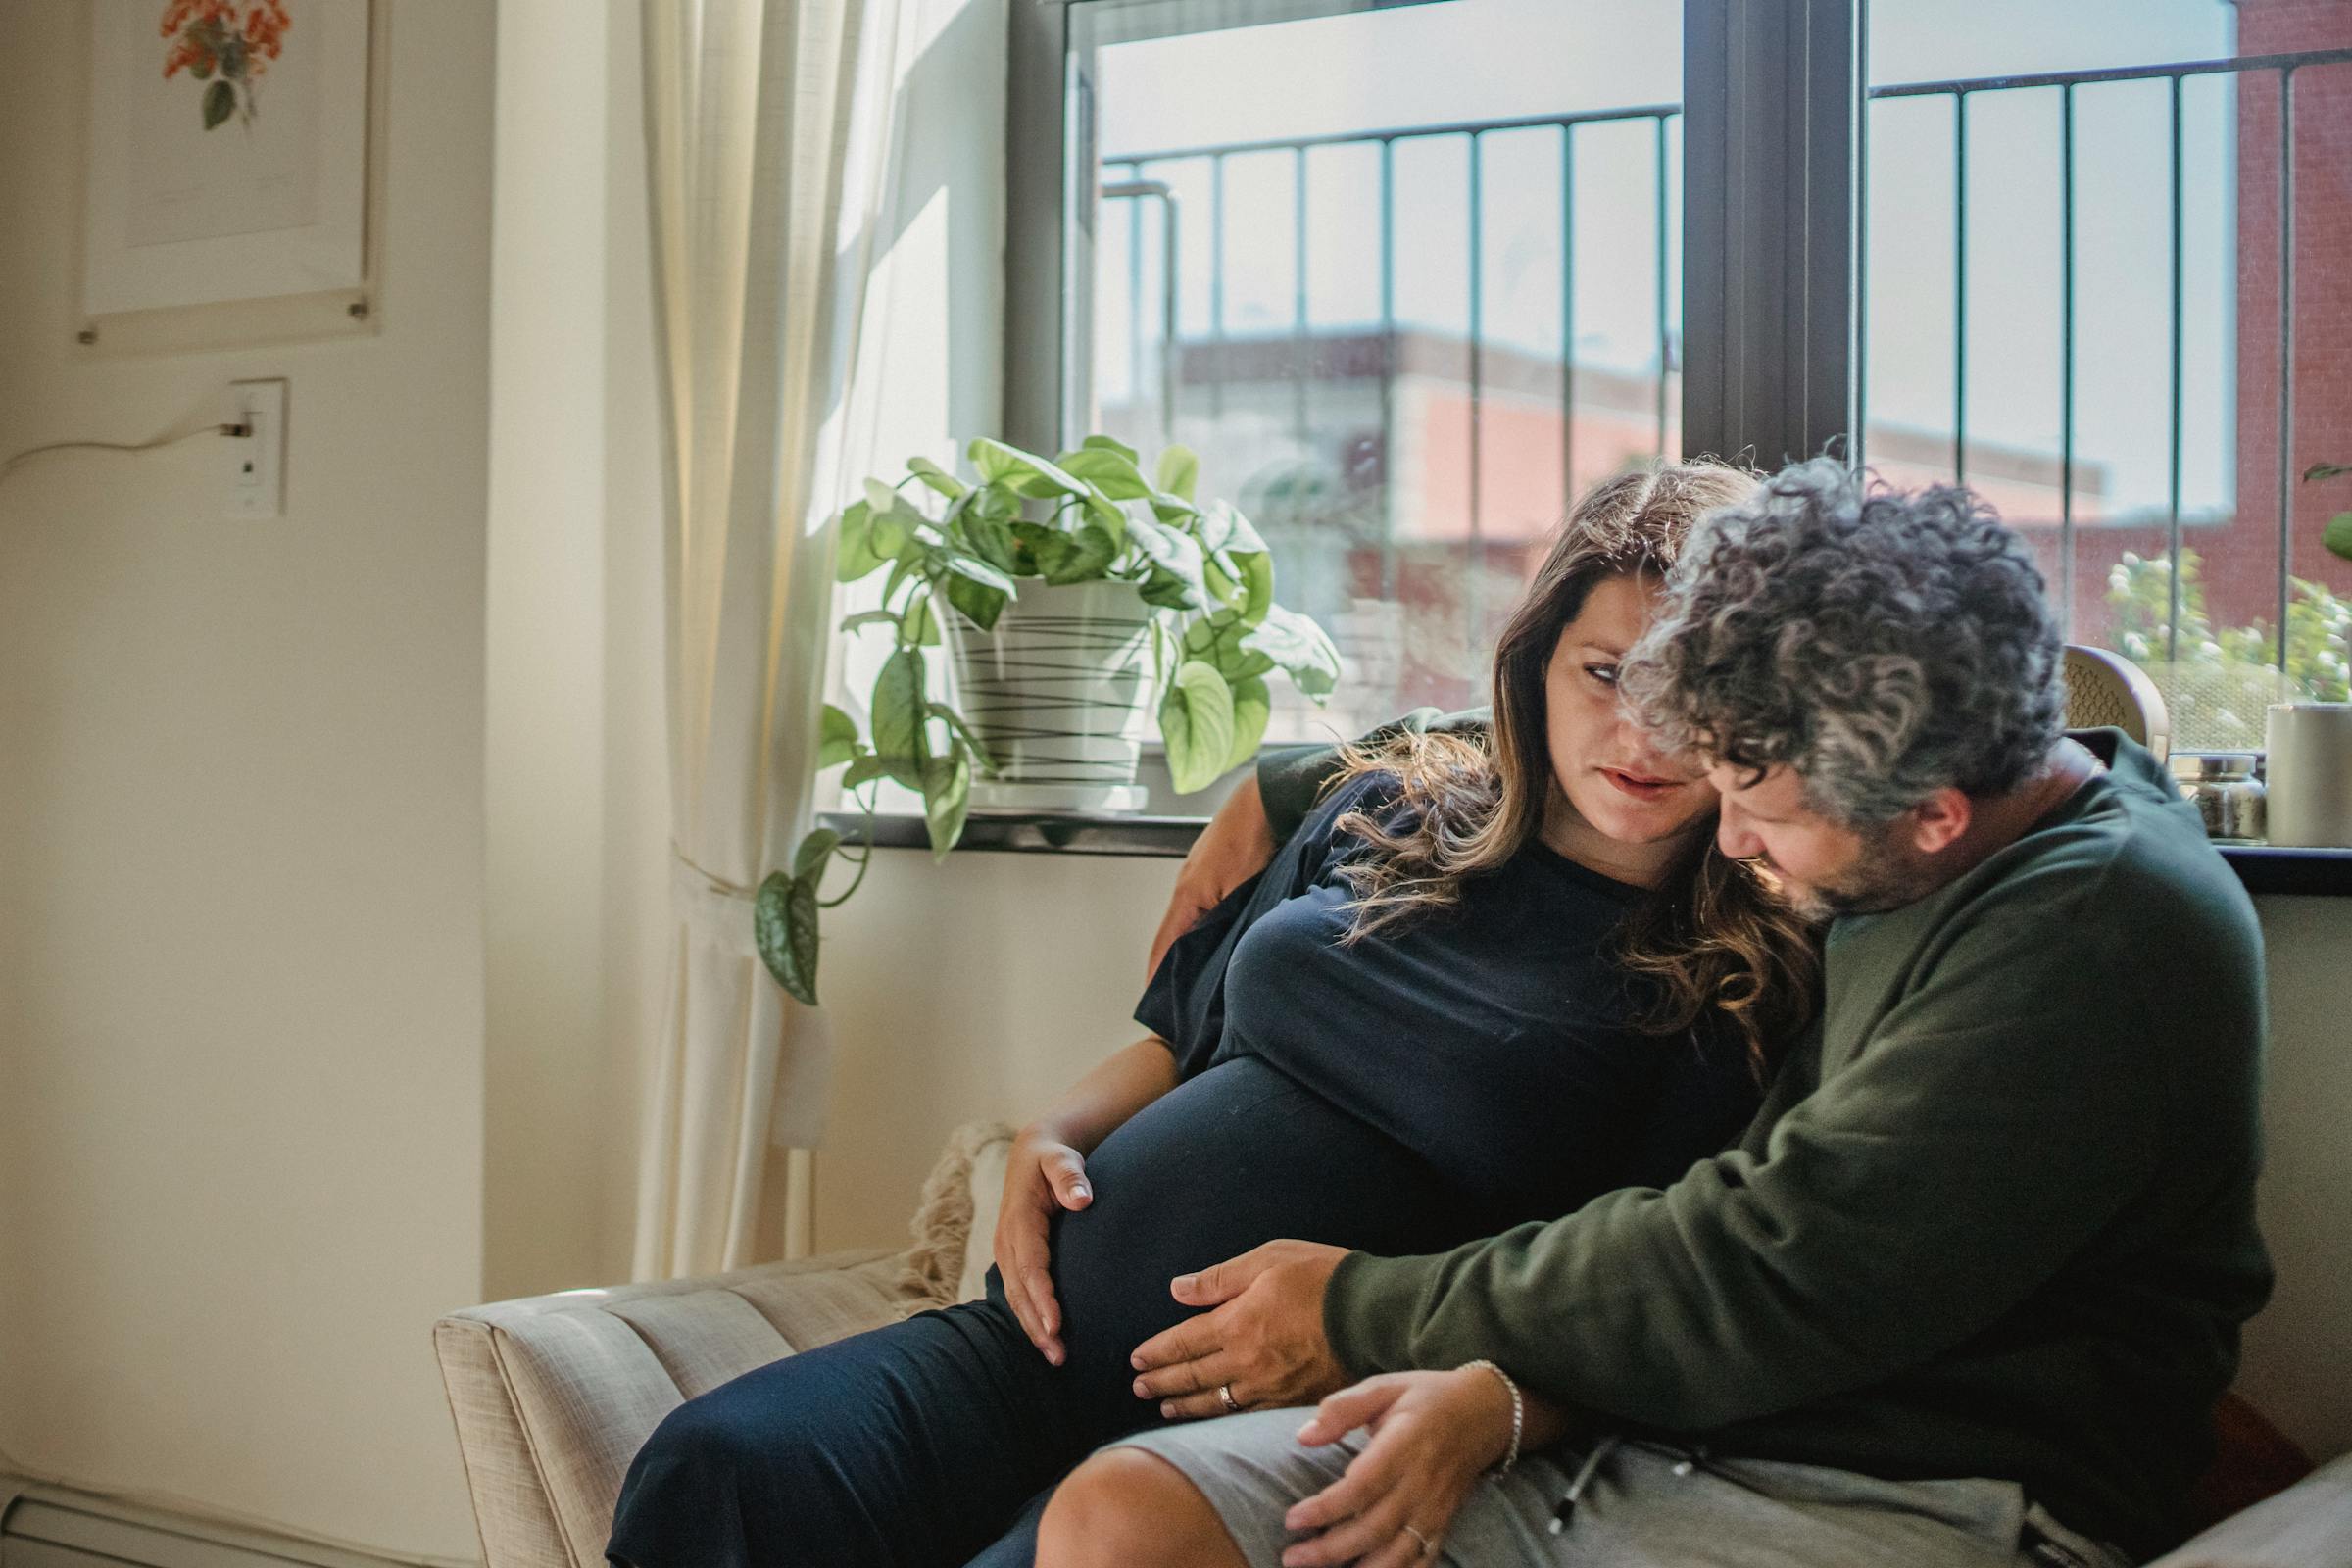 A pregnant couple sitting together | Source: Pexels